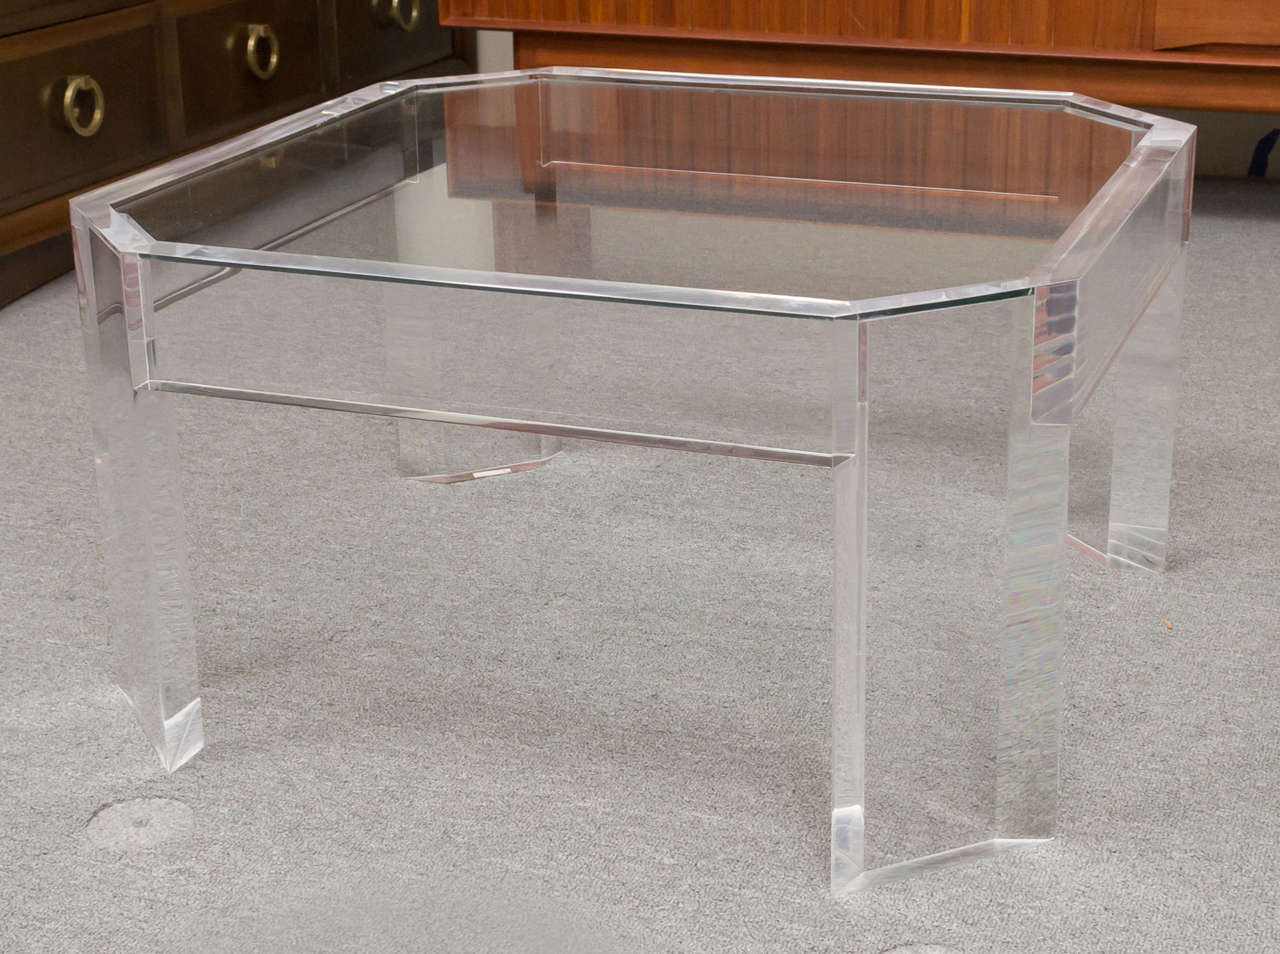 A wonderful octagon shape Lucite coffee table, that could also work as a side. With an inset glass top.
Lucite is thick, about 1 1/2 inches to 2 inches. A nice Charles Hollis Jones design.